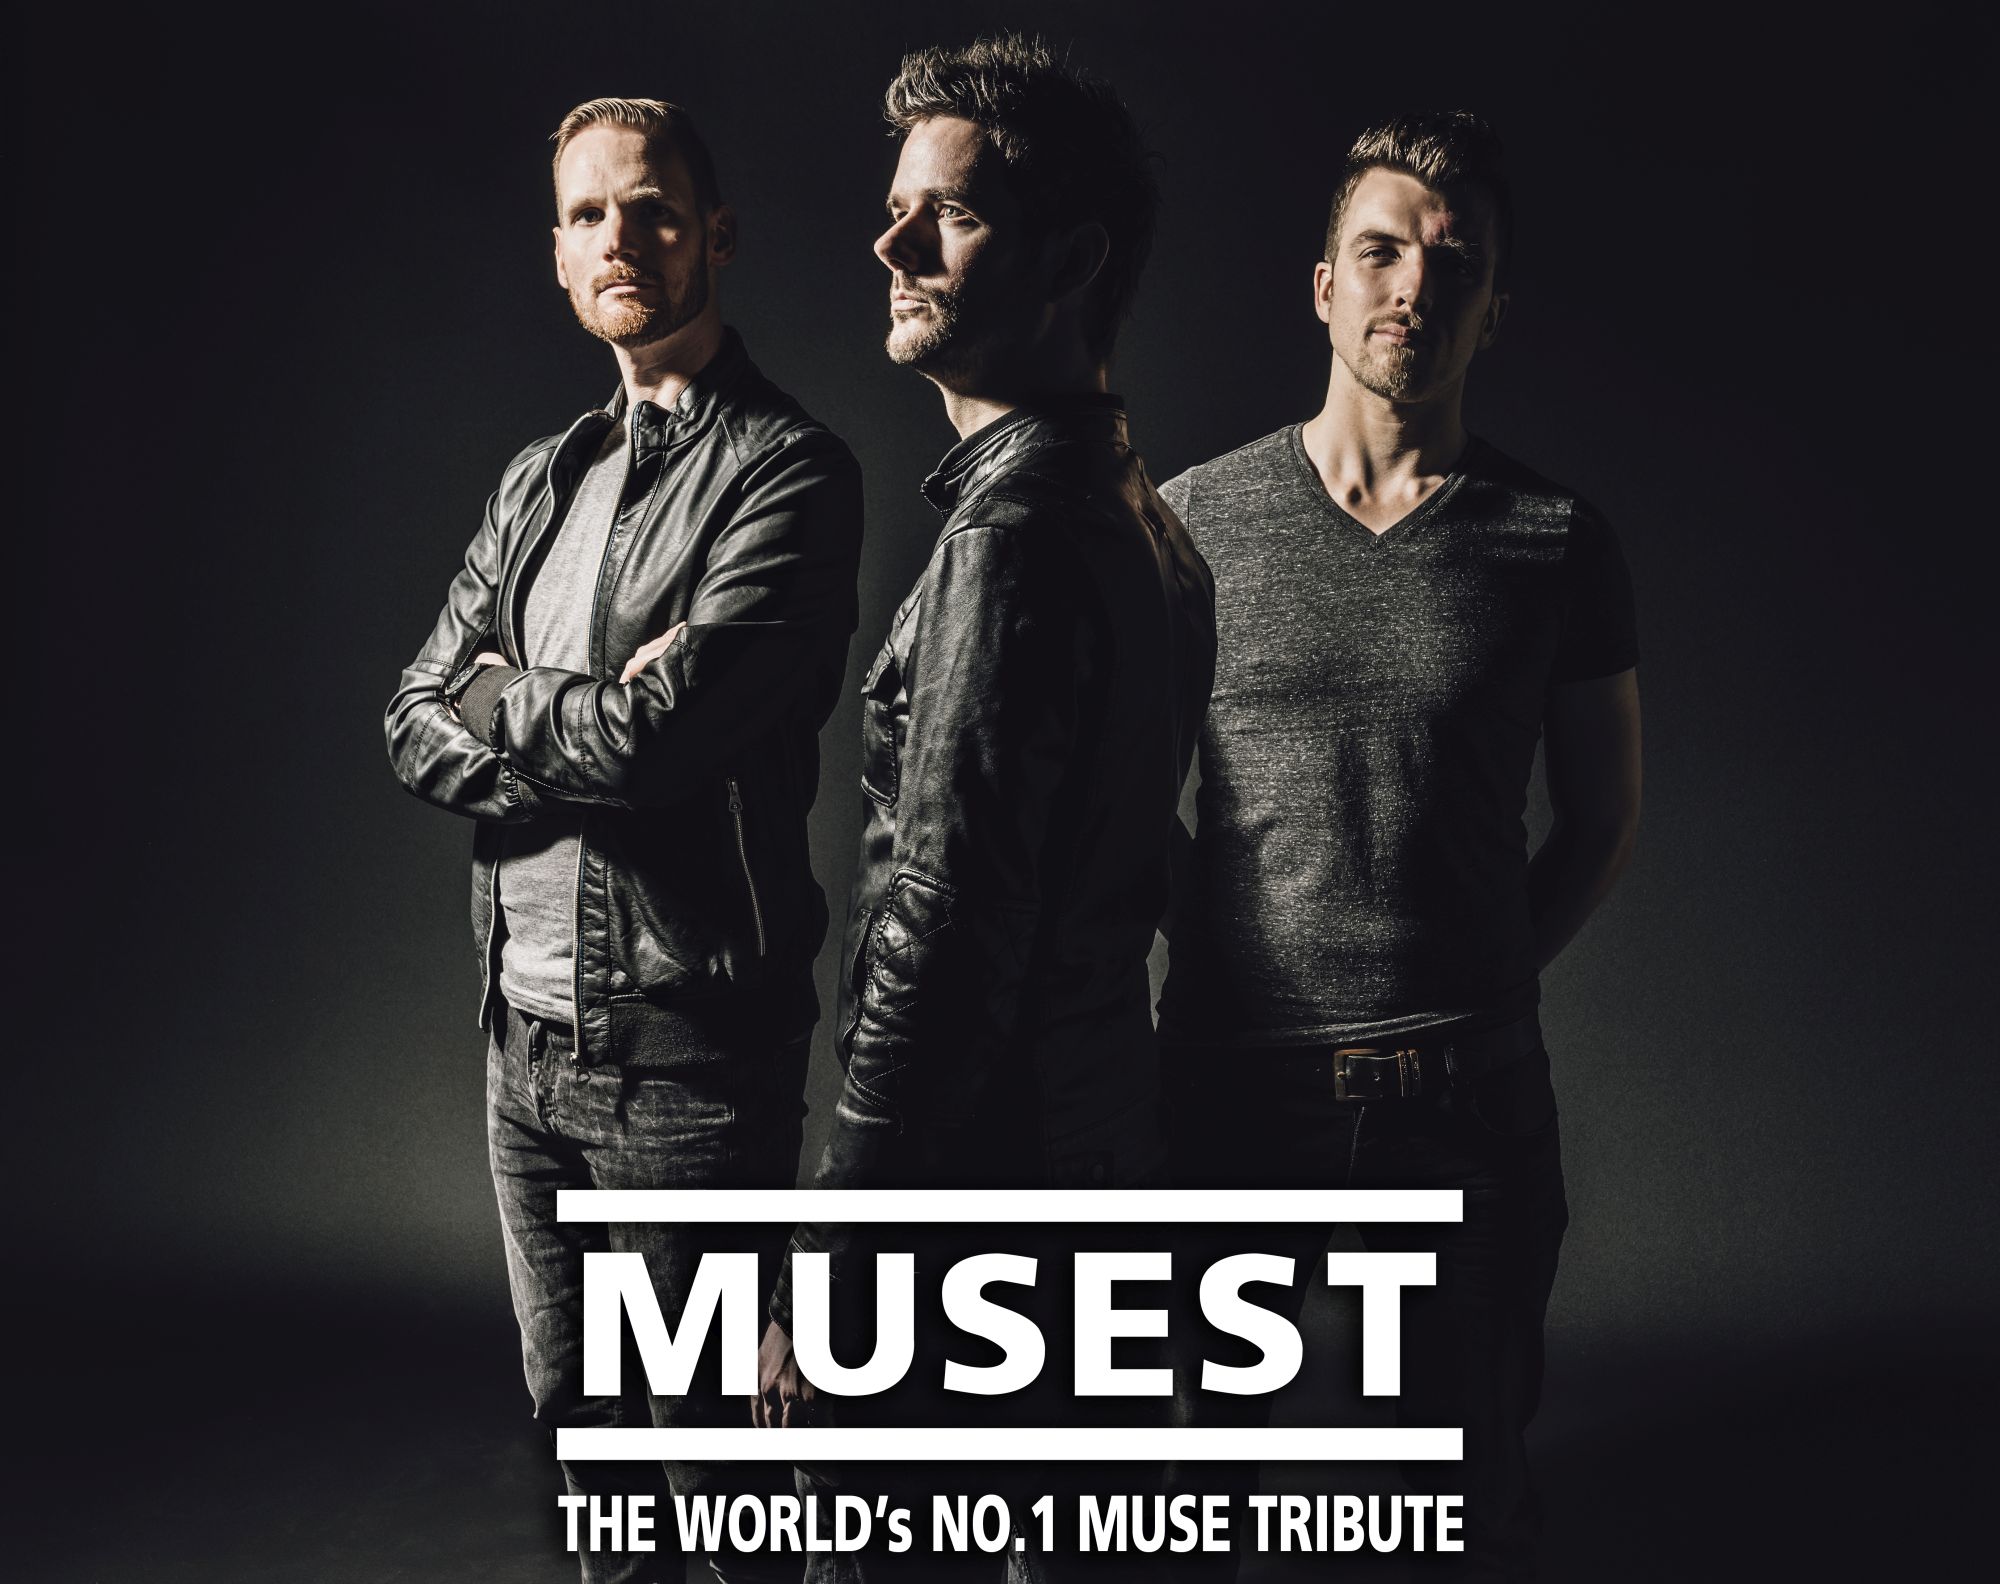 MUSEST Promo Photo 1 + LOGO small